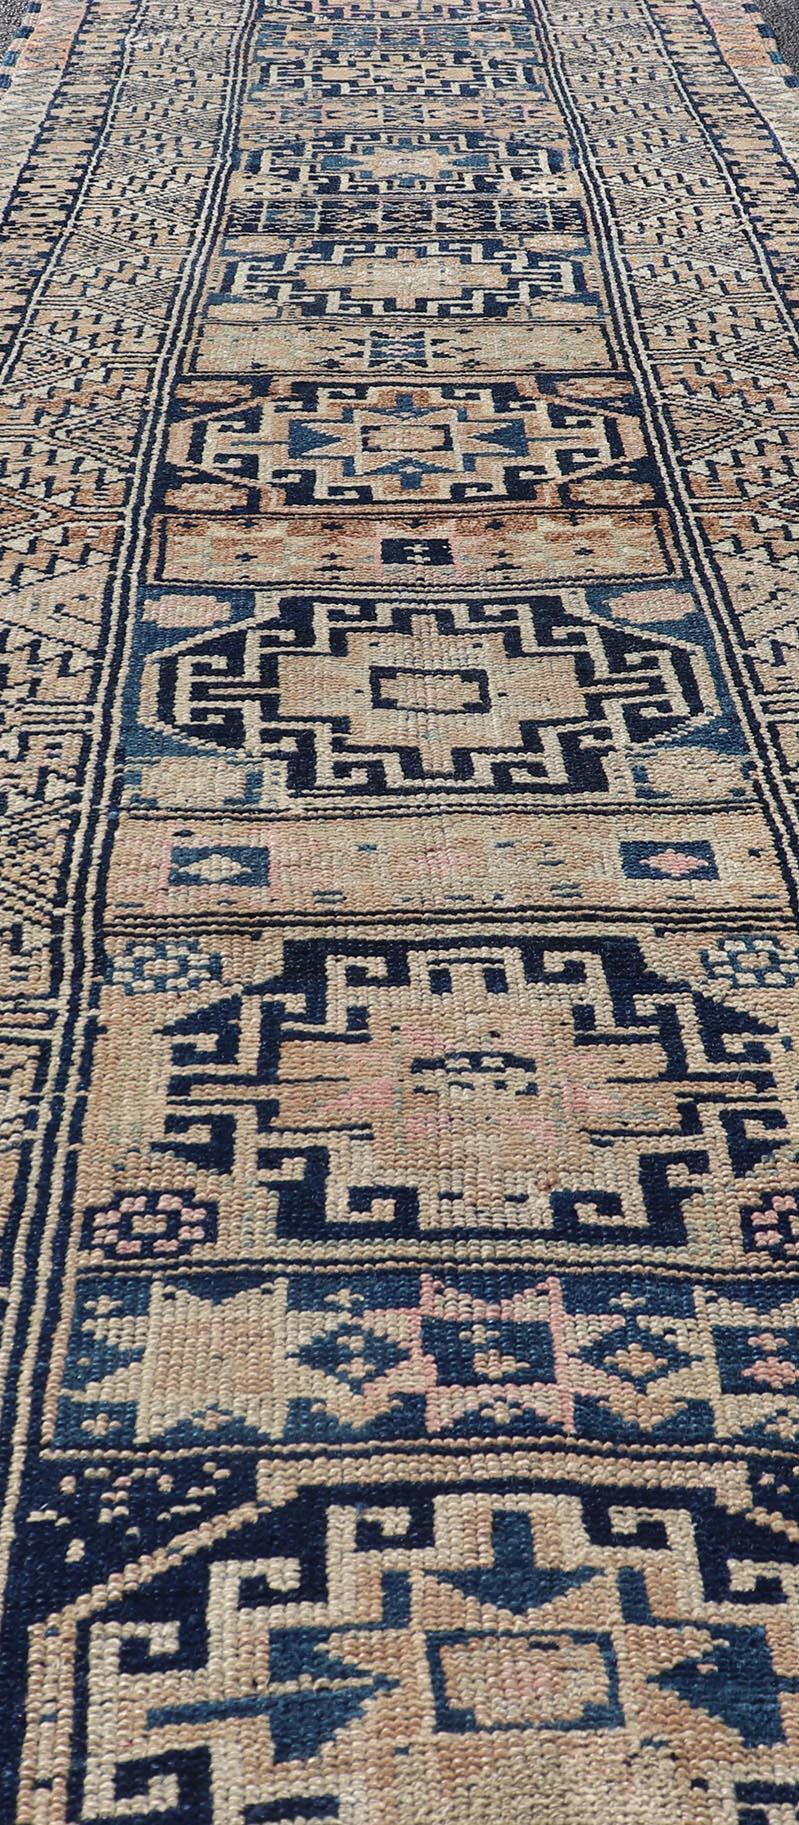 Vintage Oushak Turkish Runner with Geometric Design in Blues, Taupe, and Cream For Sale 4